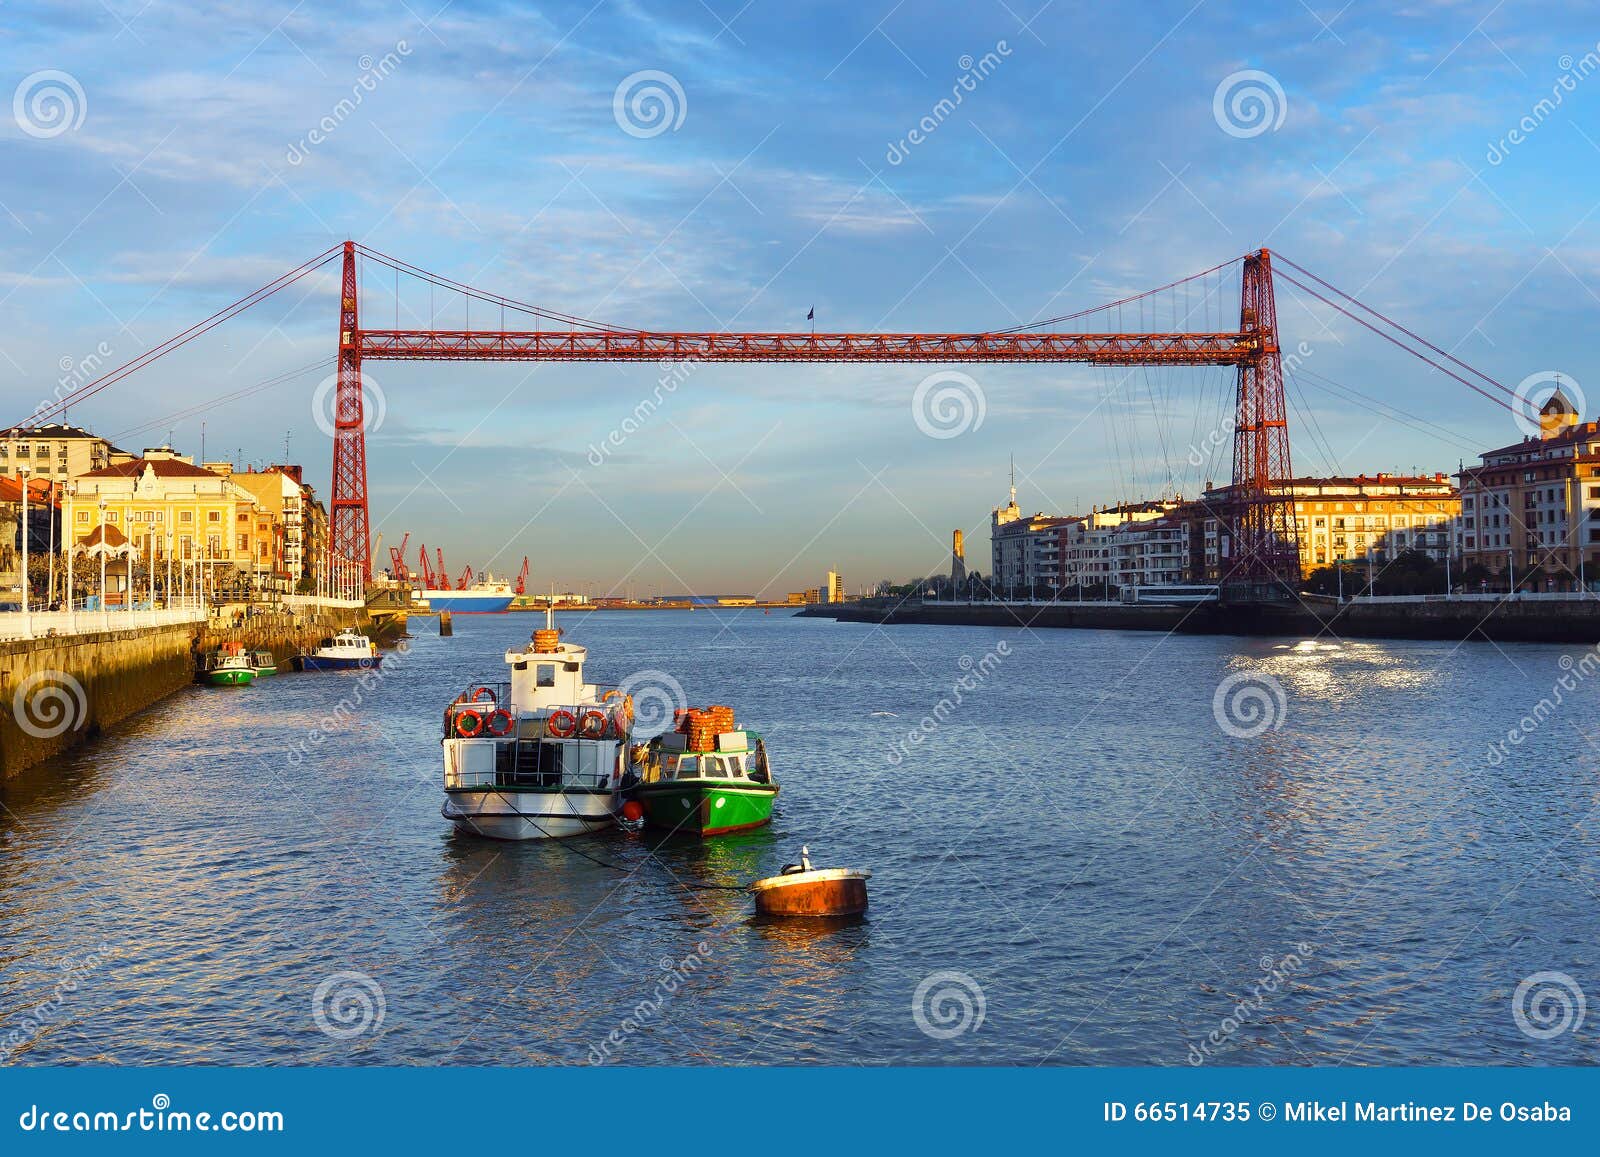 portugalete and las arenas of getxo with hanging bridge